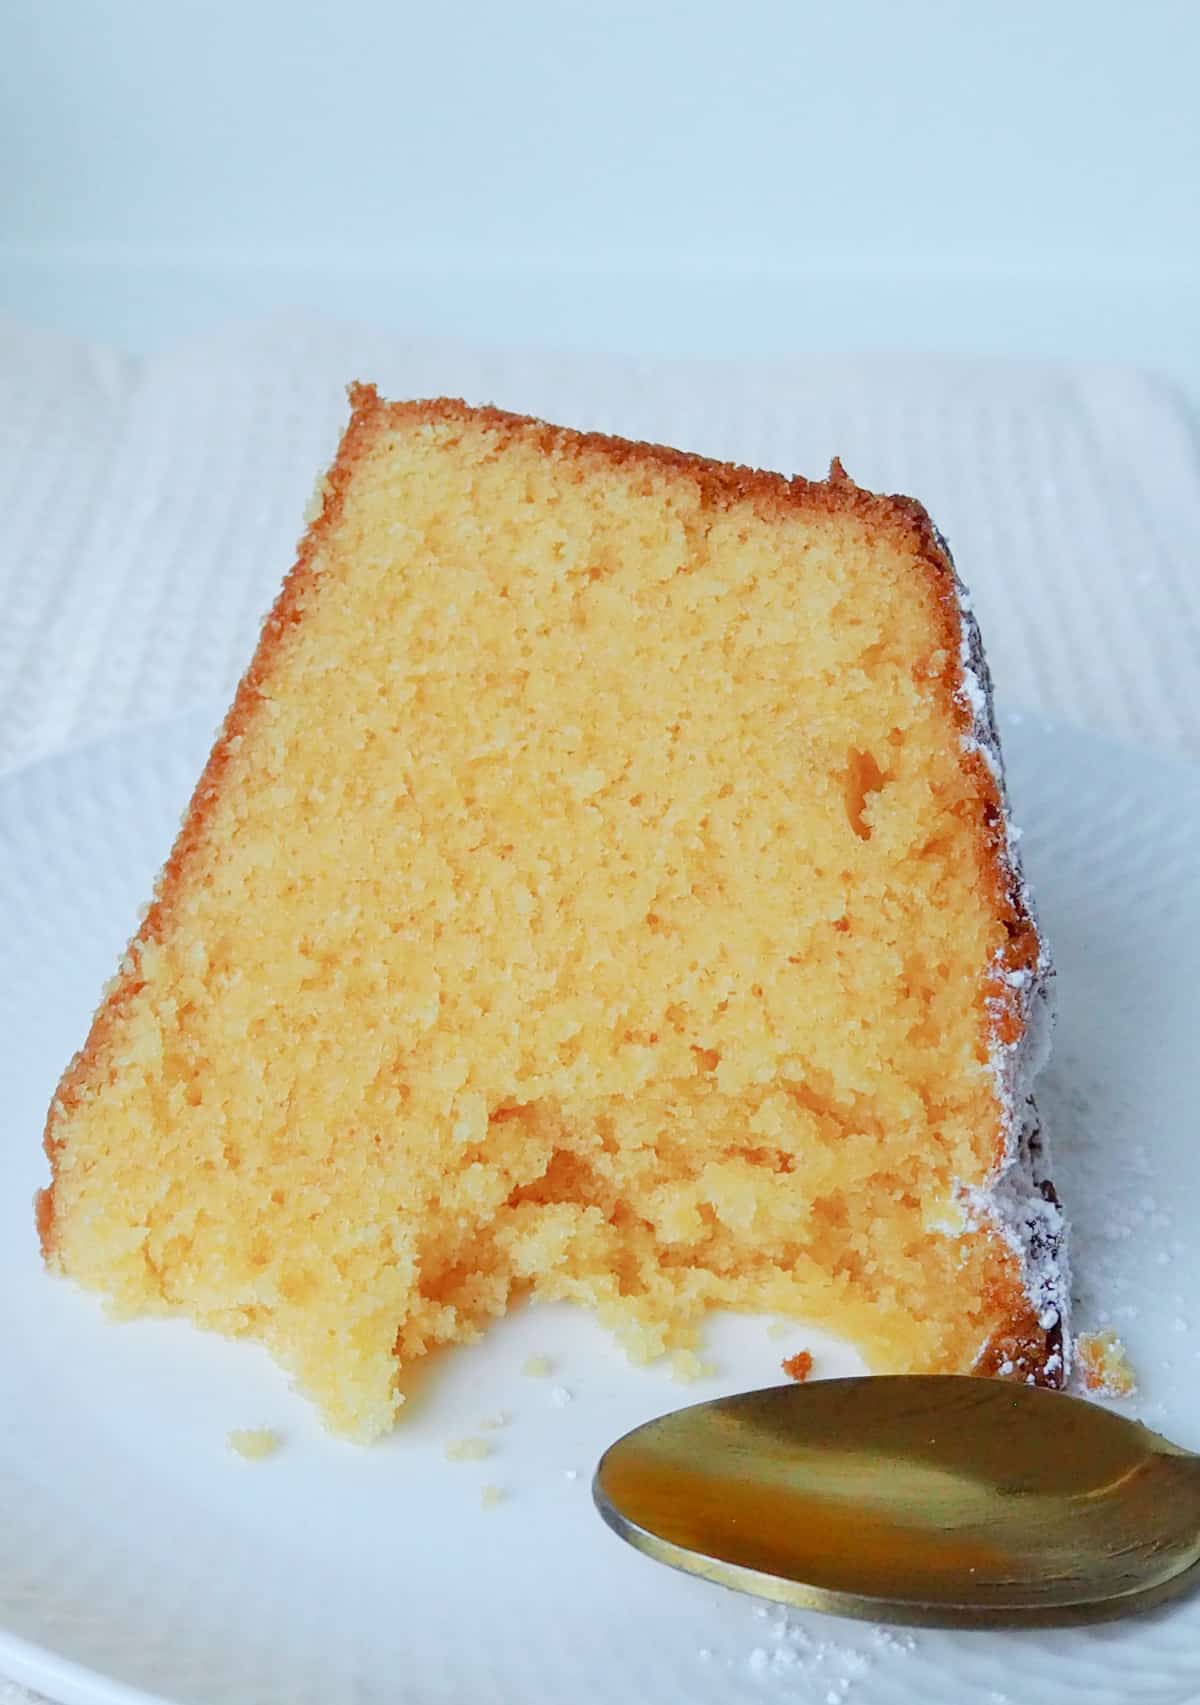 Slice of custard cake with a piece removed on a white plate. There is a gold spoon sitting next to it.